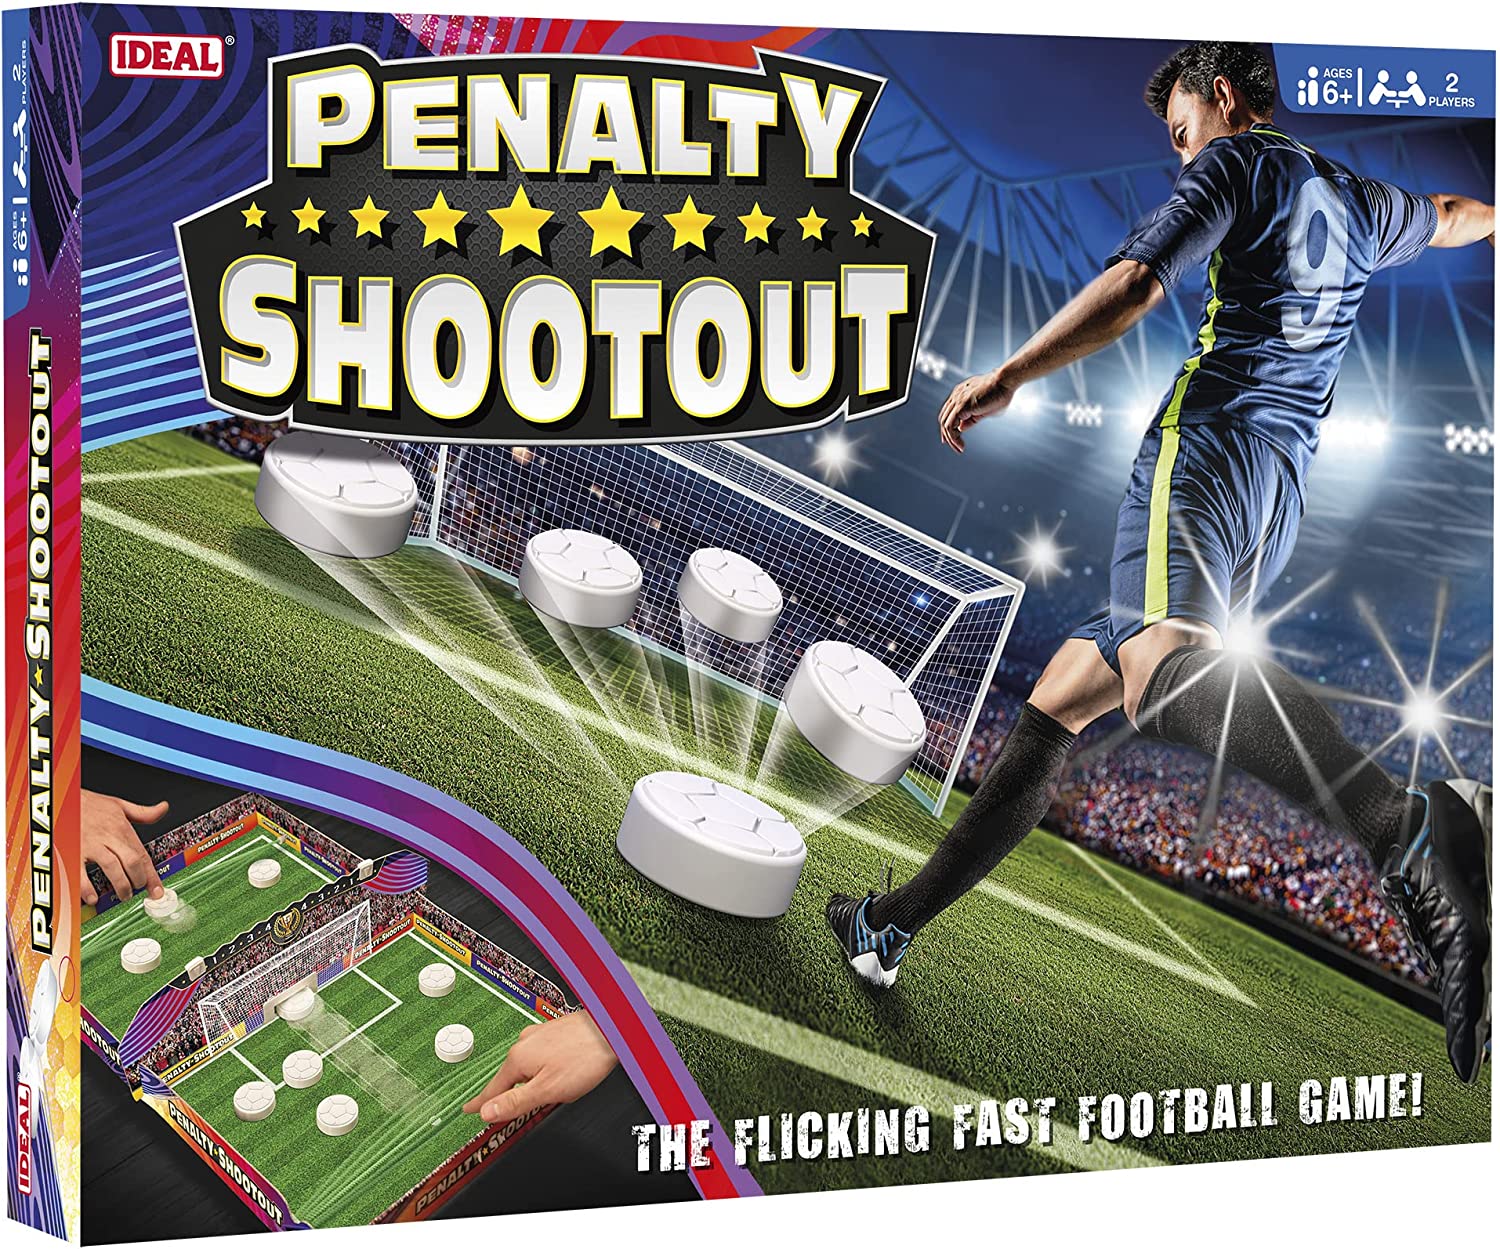 Penalty Shoot Out